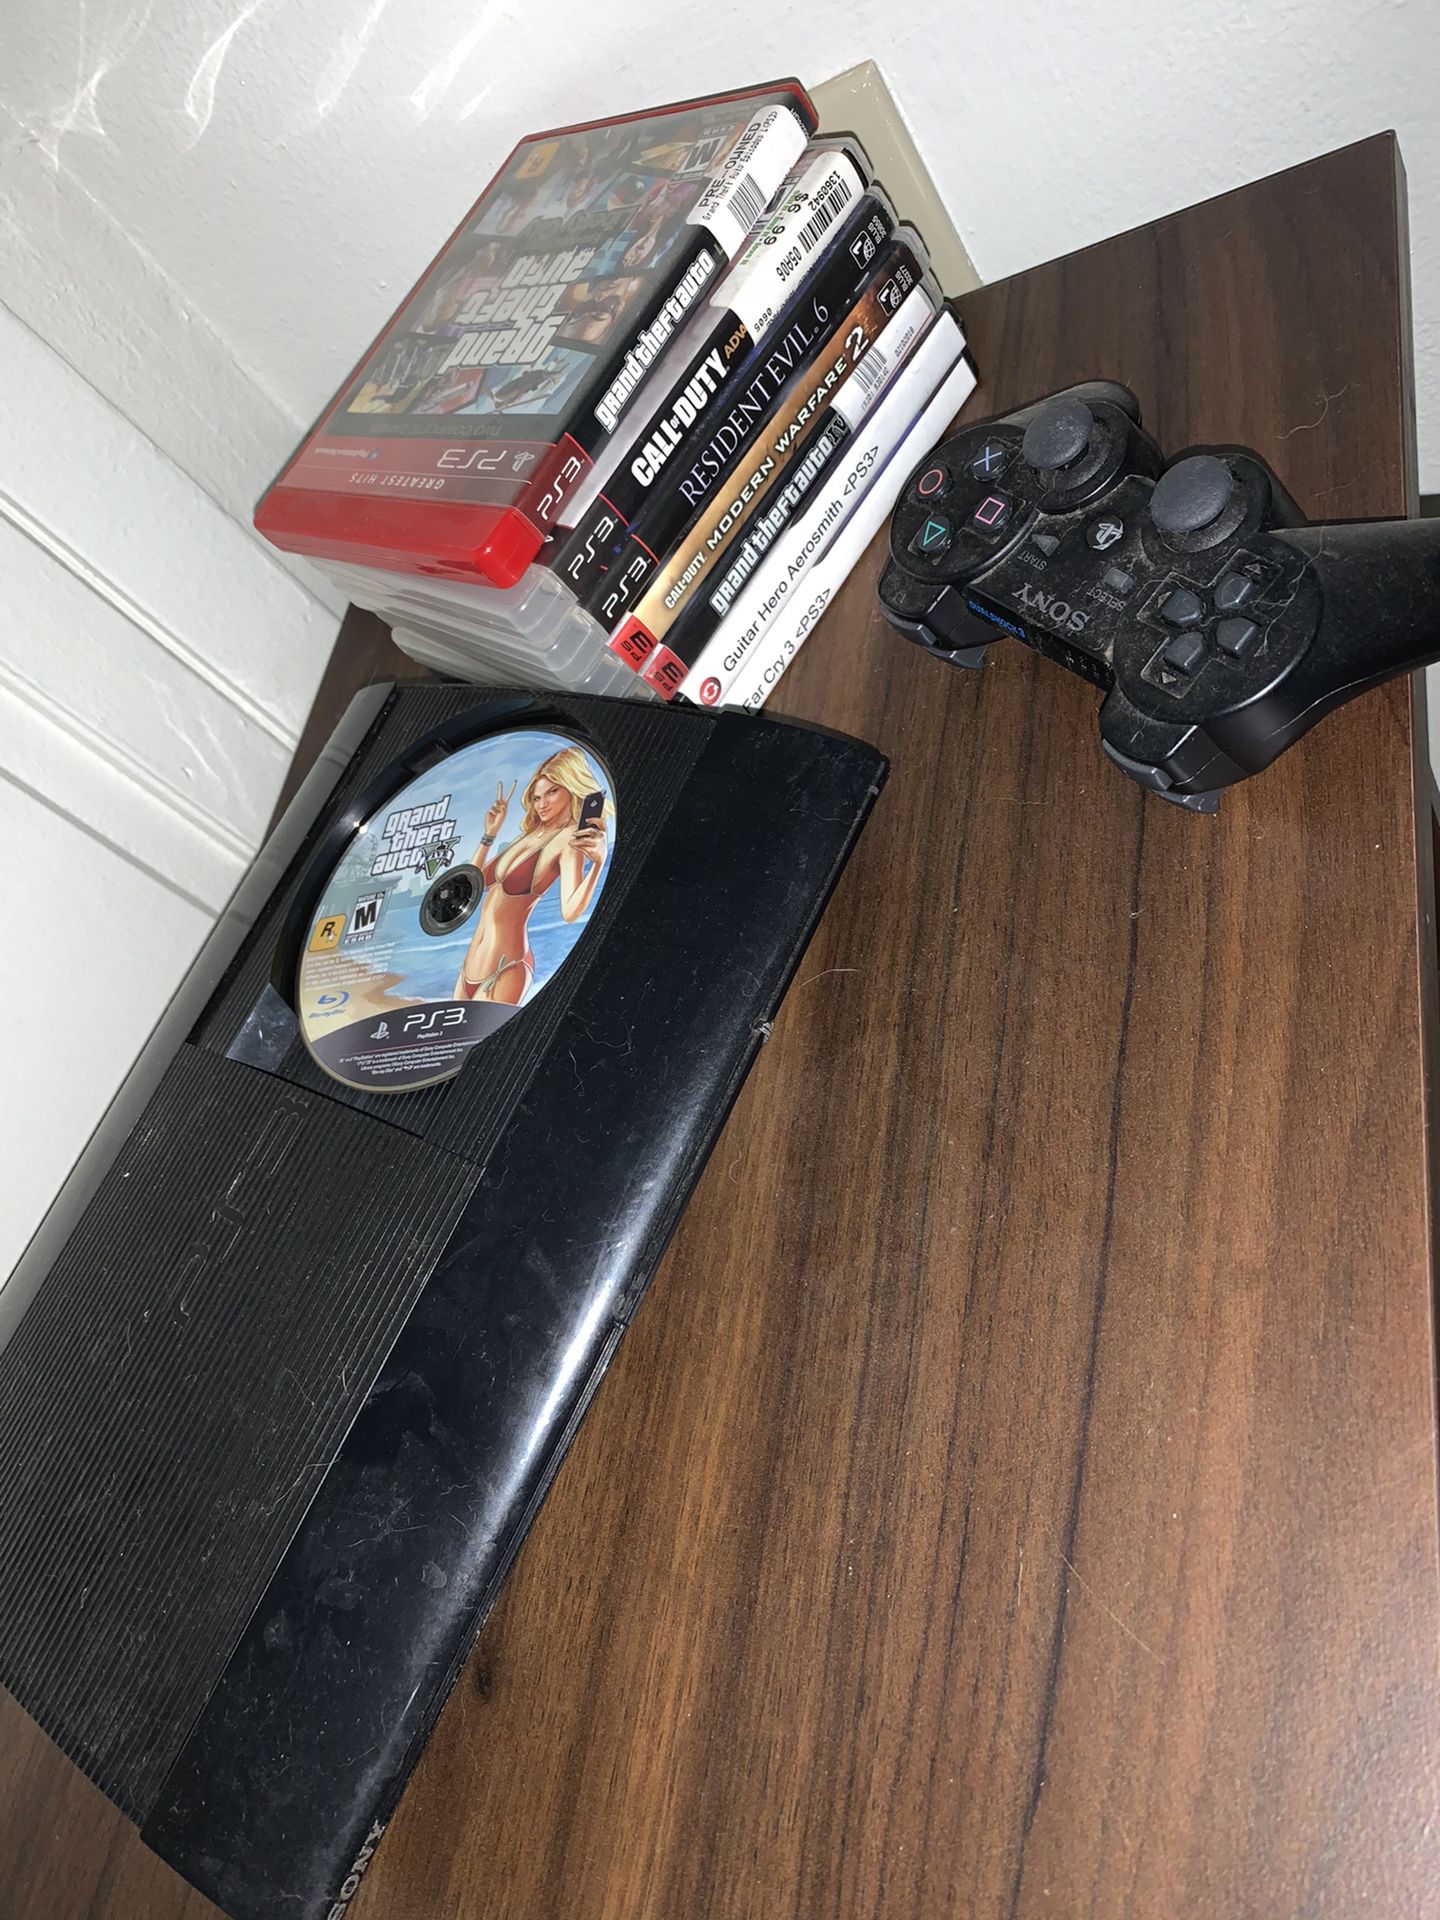 PS3. 7 Games. 1 controller